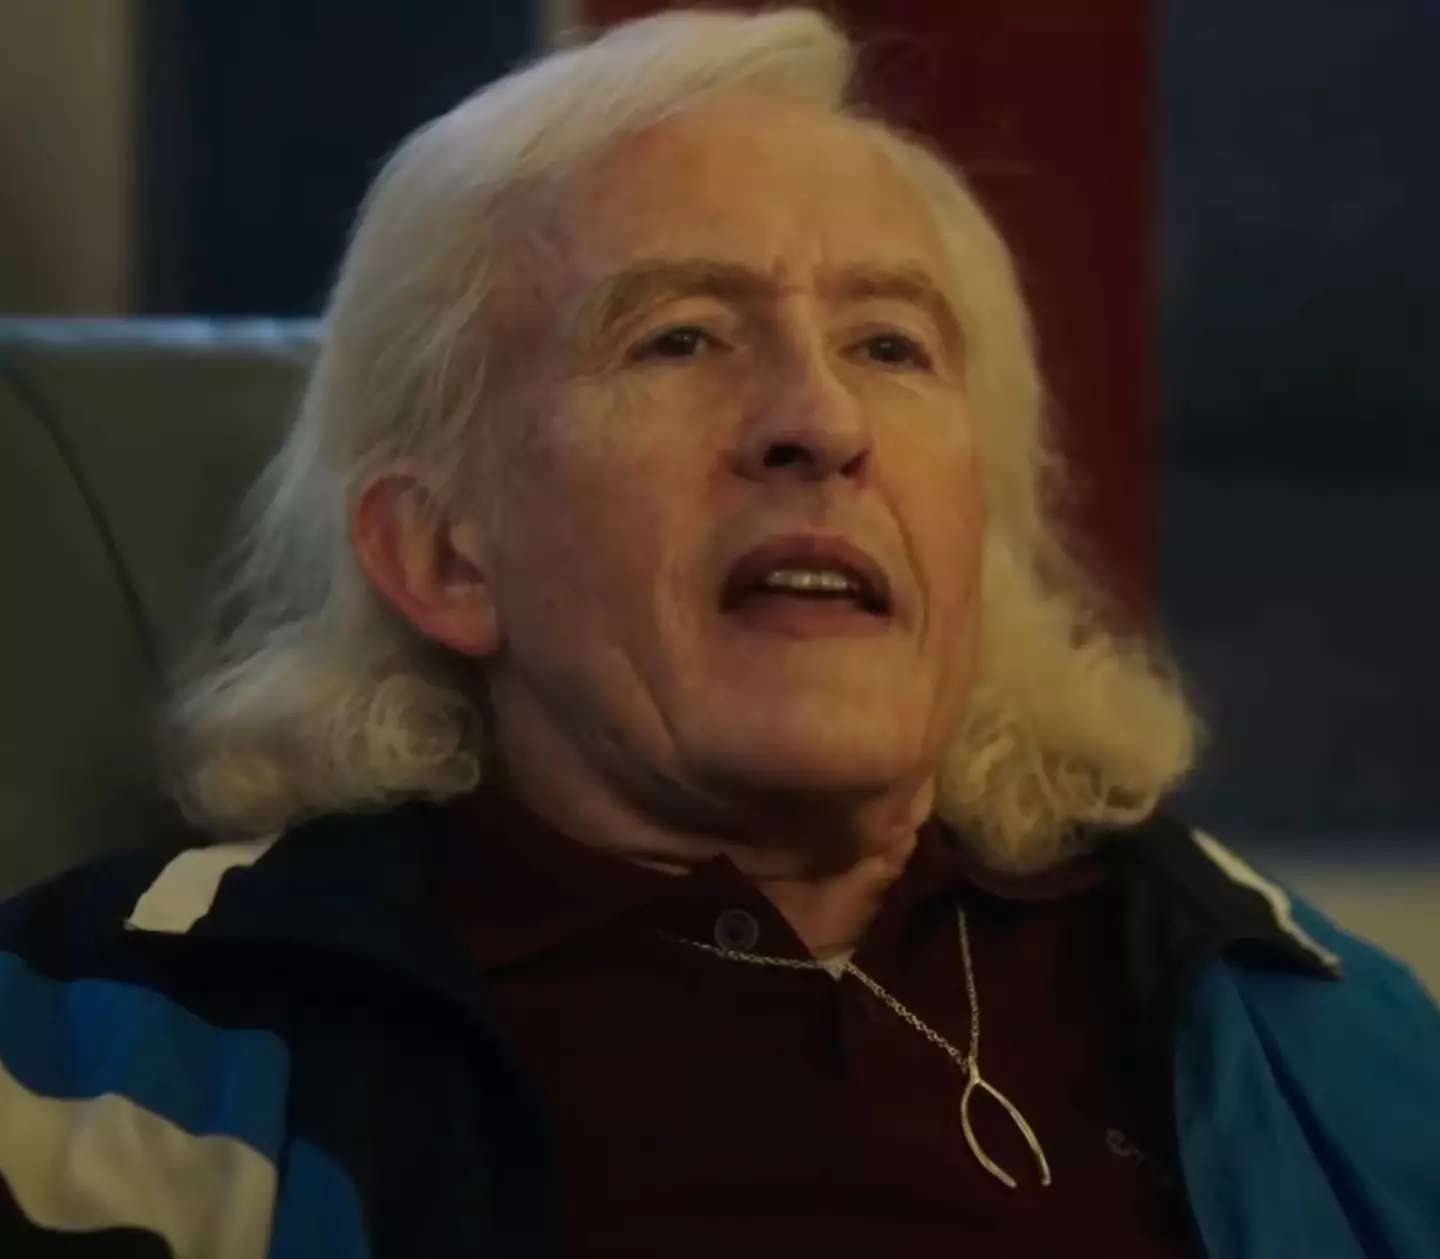 Steve Coogan has been praised for his performance as Jimmy Savile in The Reckoning.